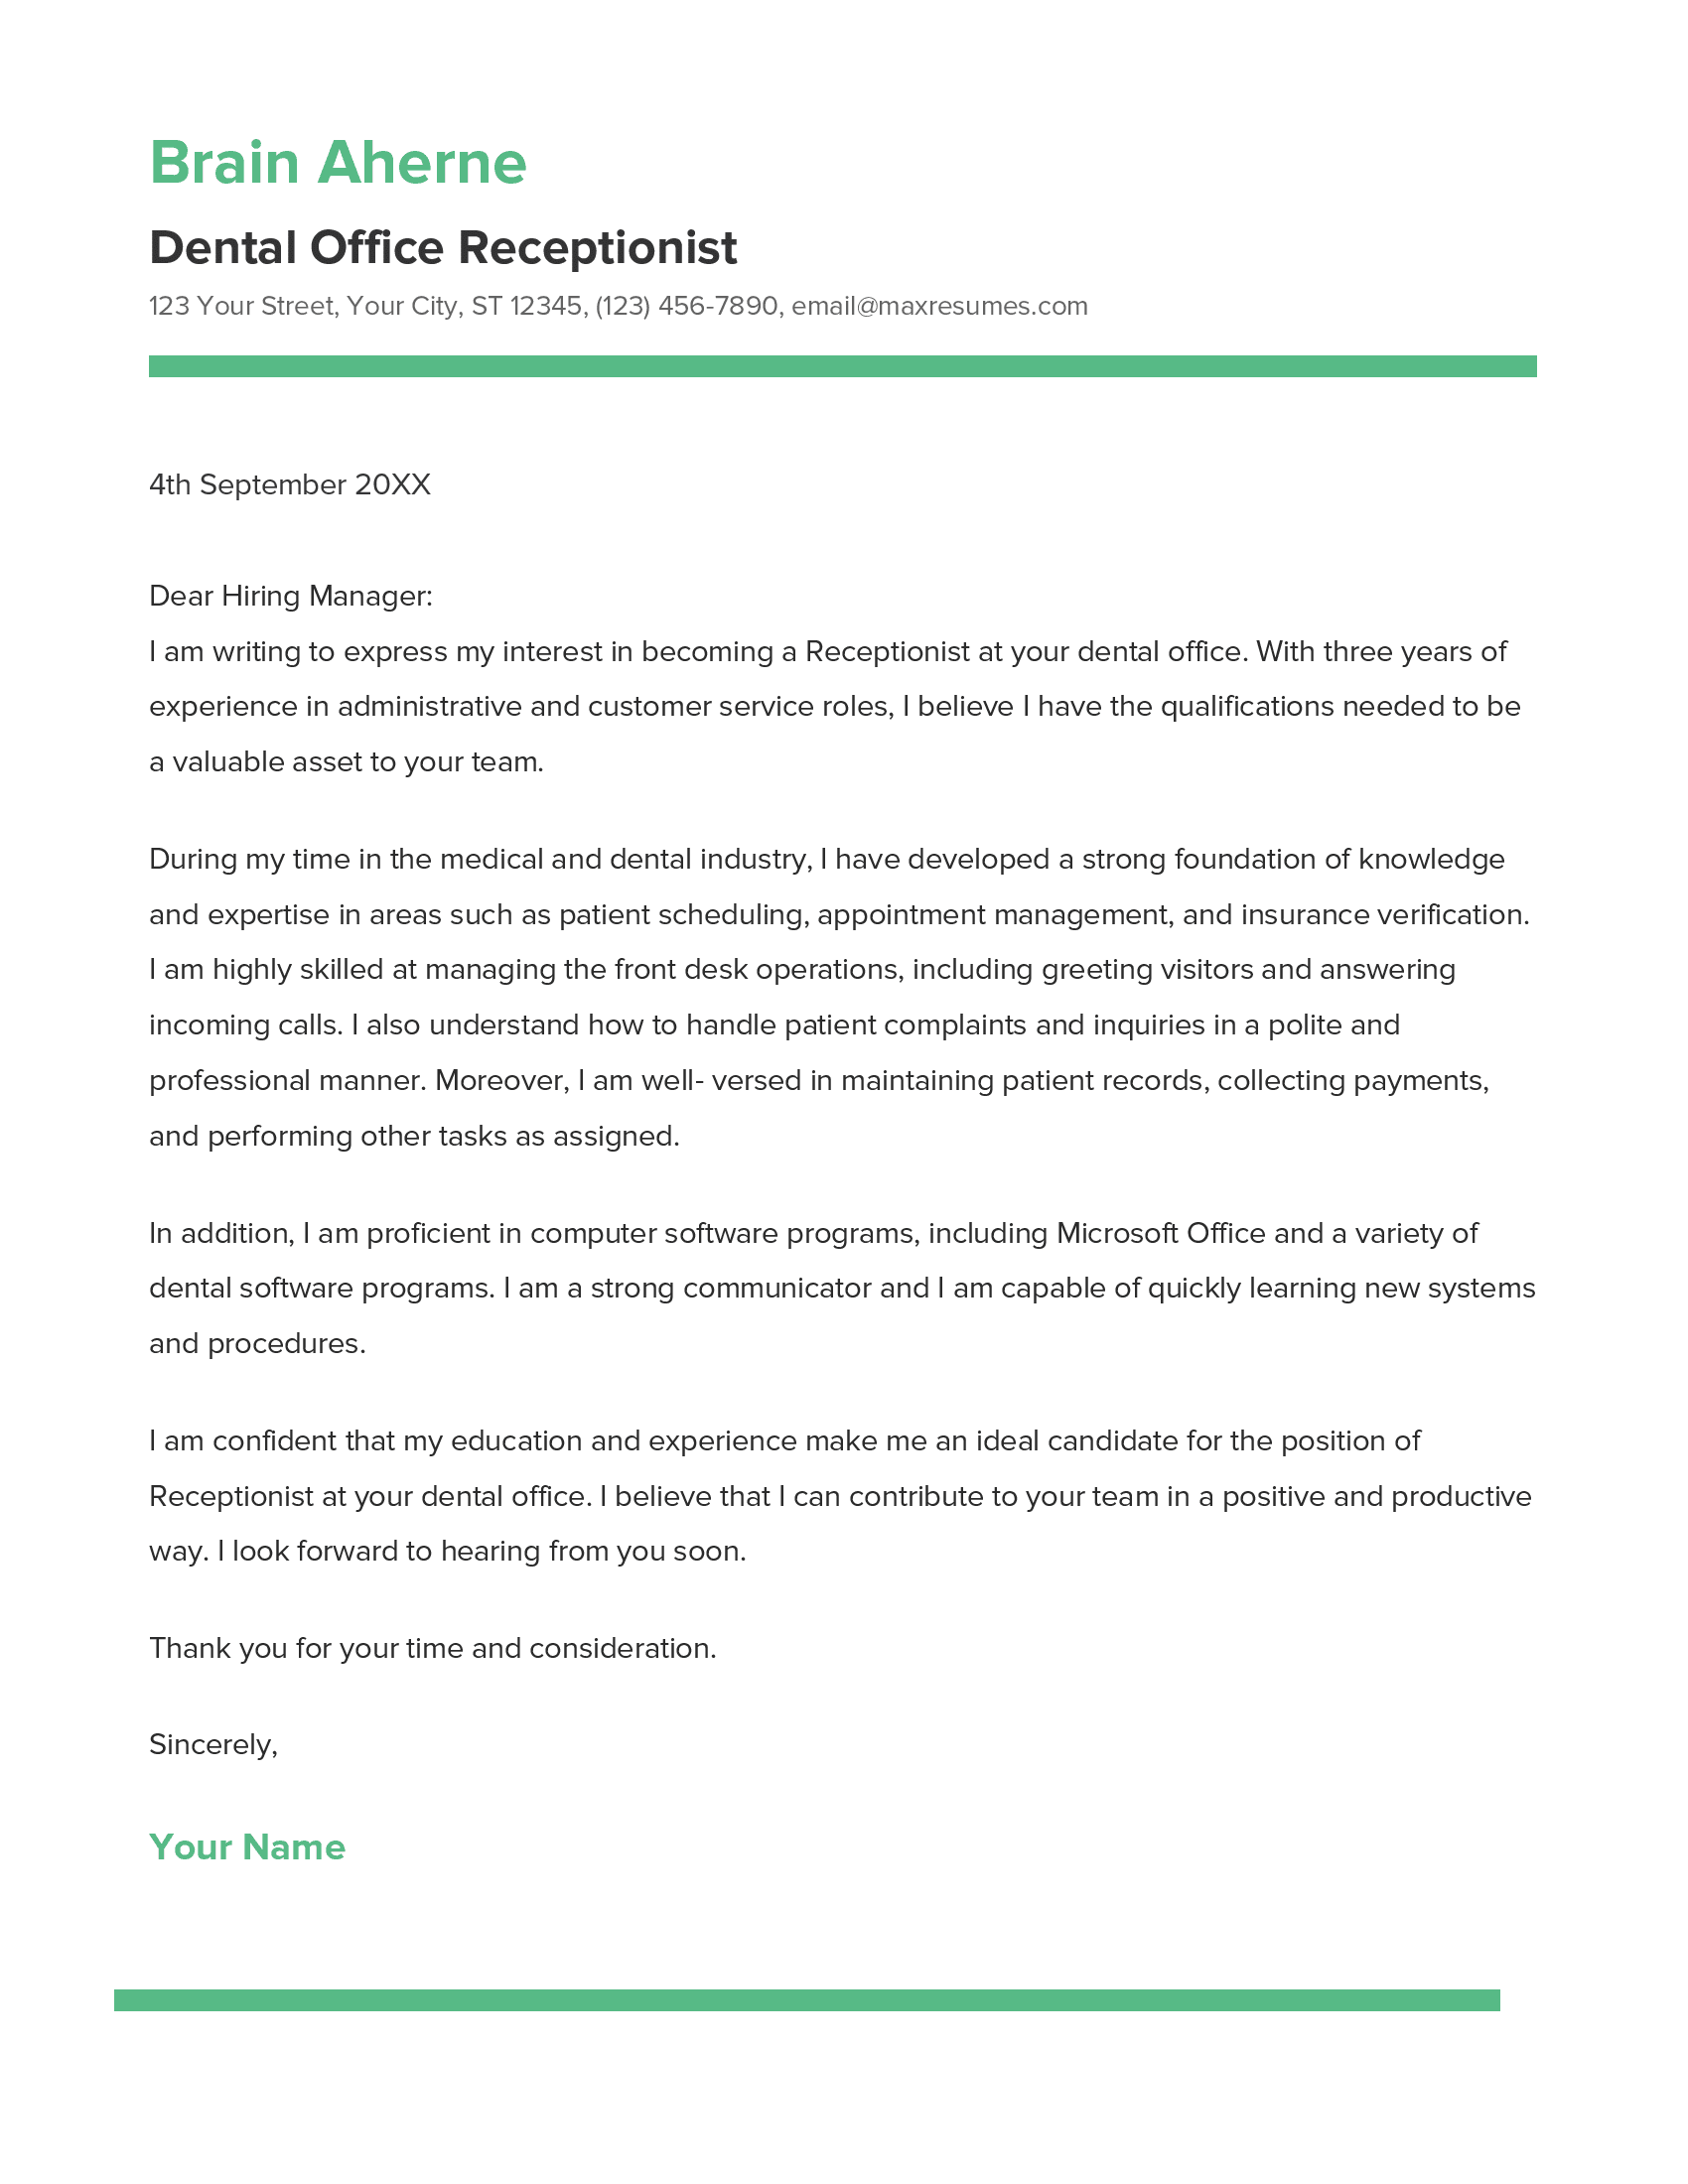 Dental Office Receptionist Cover Letter Example